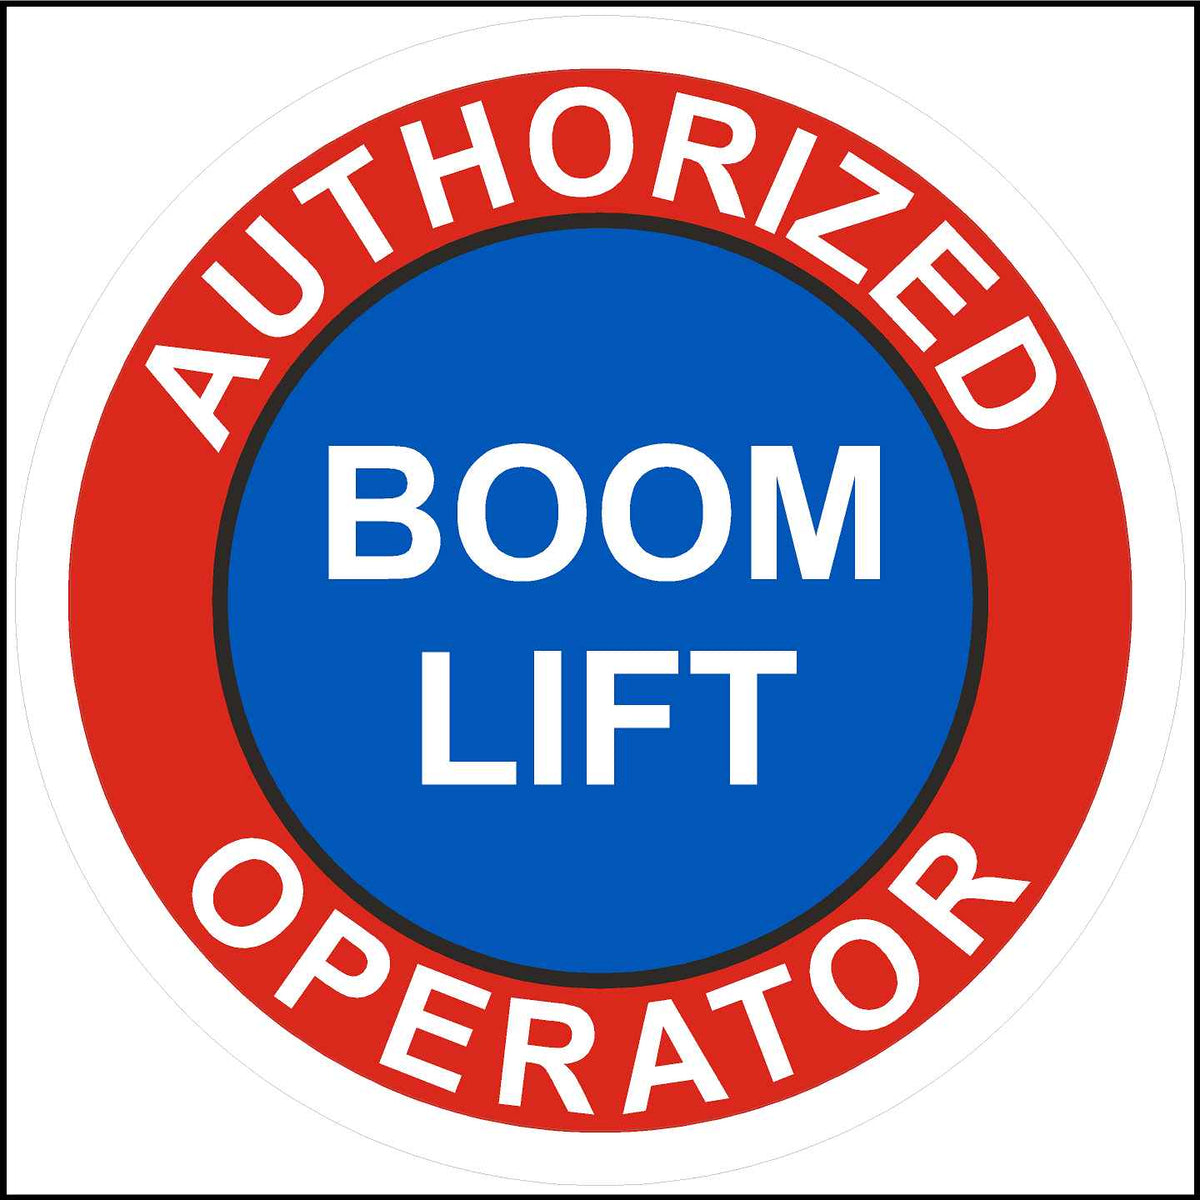 Authorized boom lift operator sticker printed in red white and blue